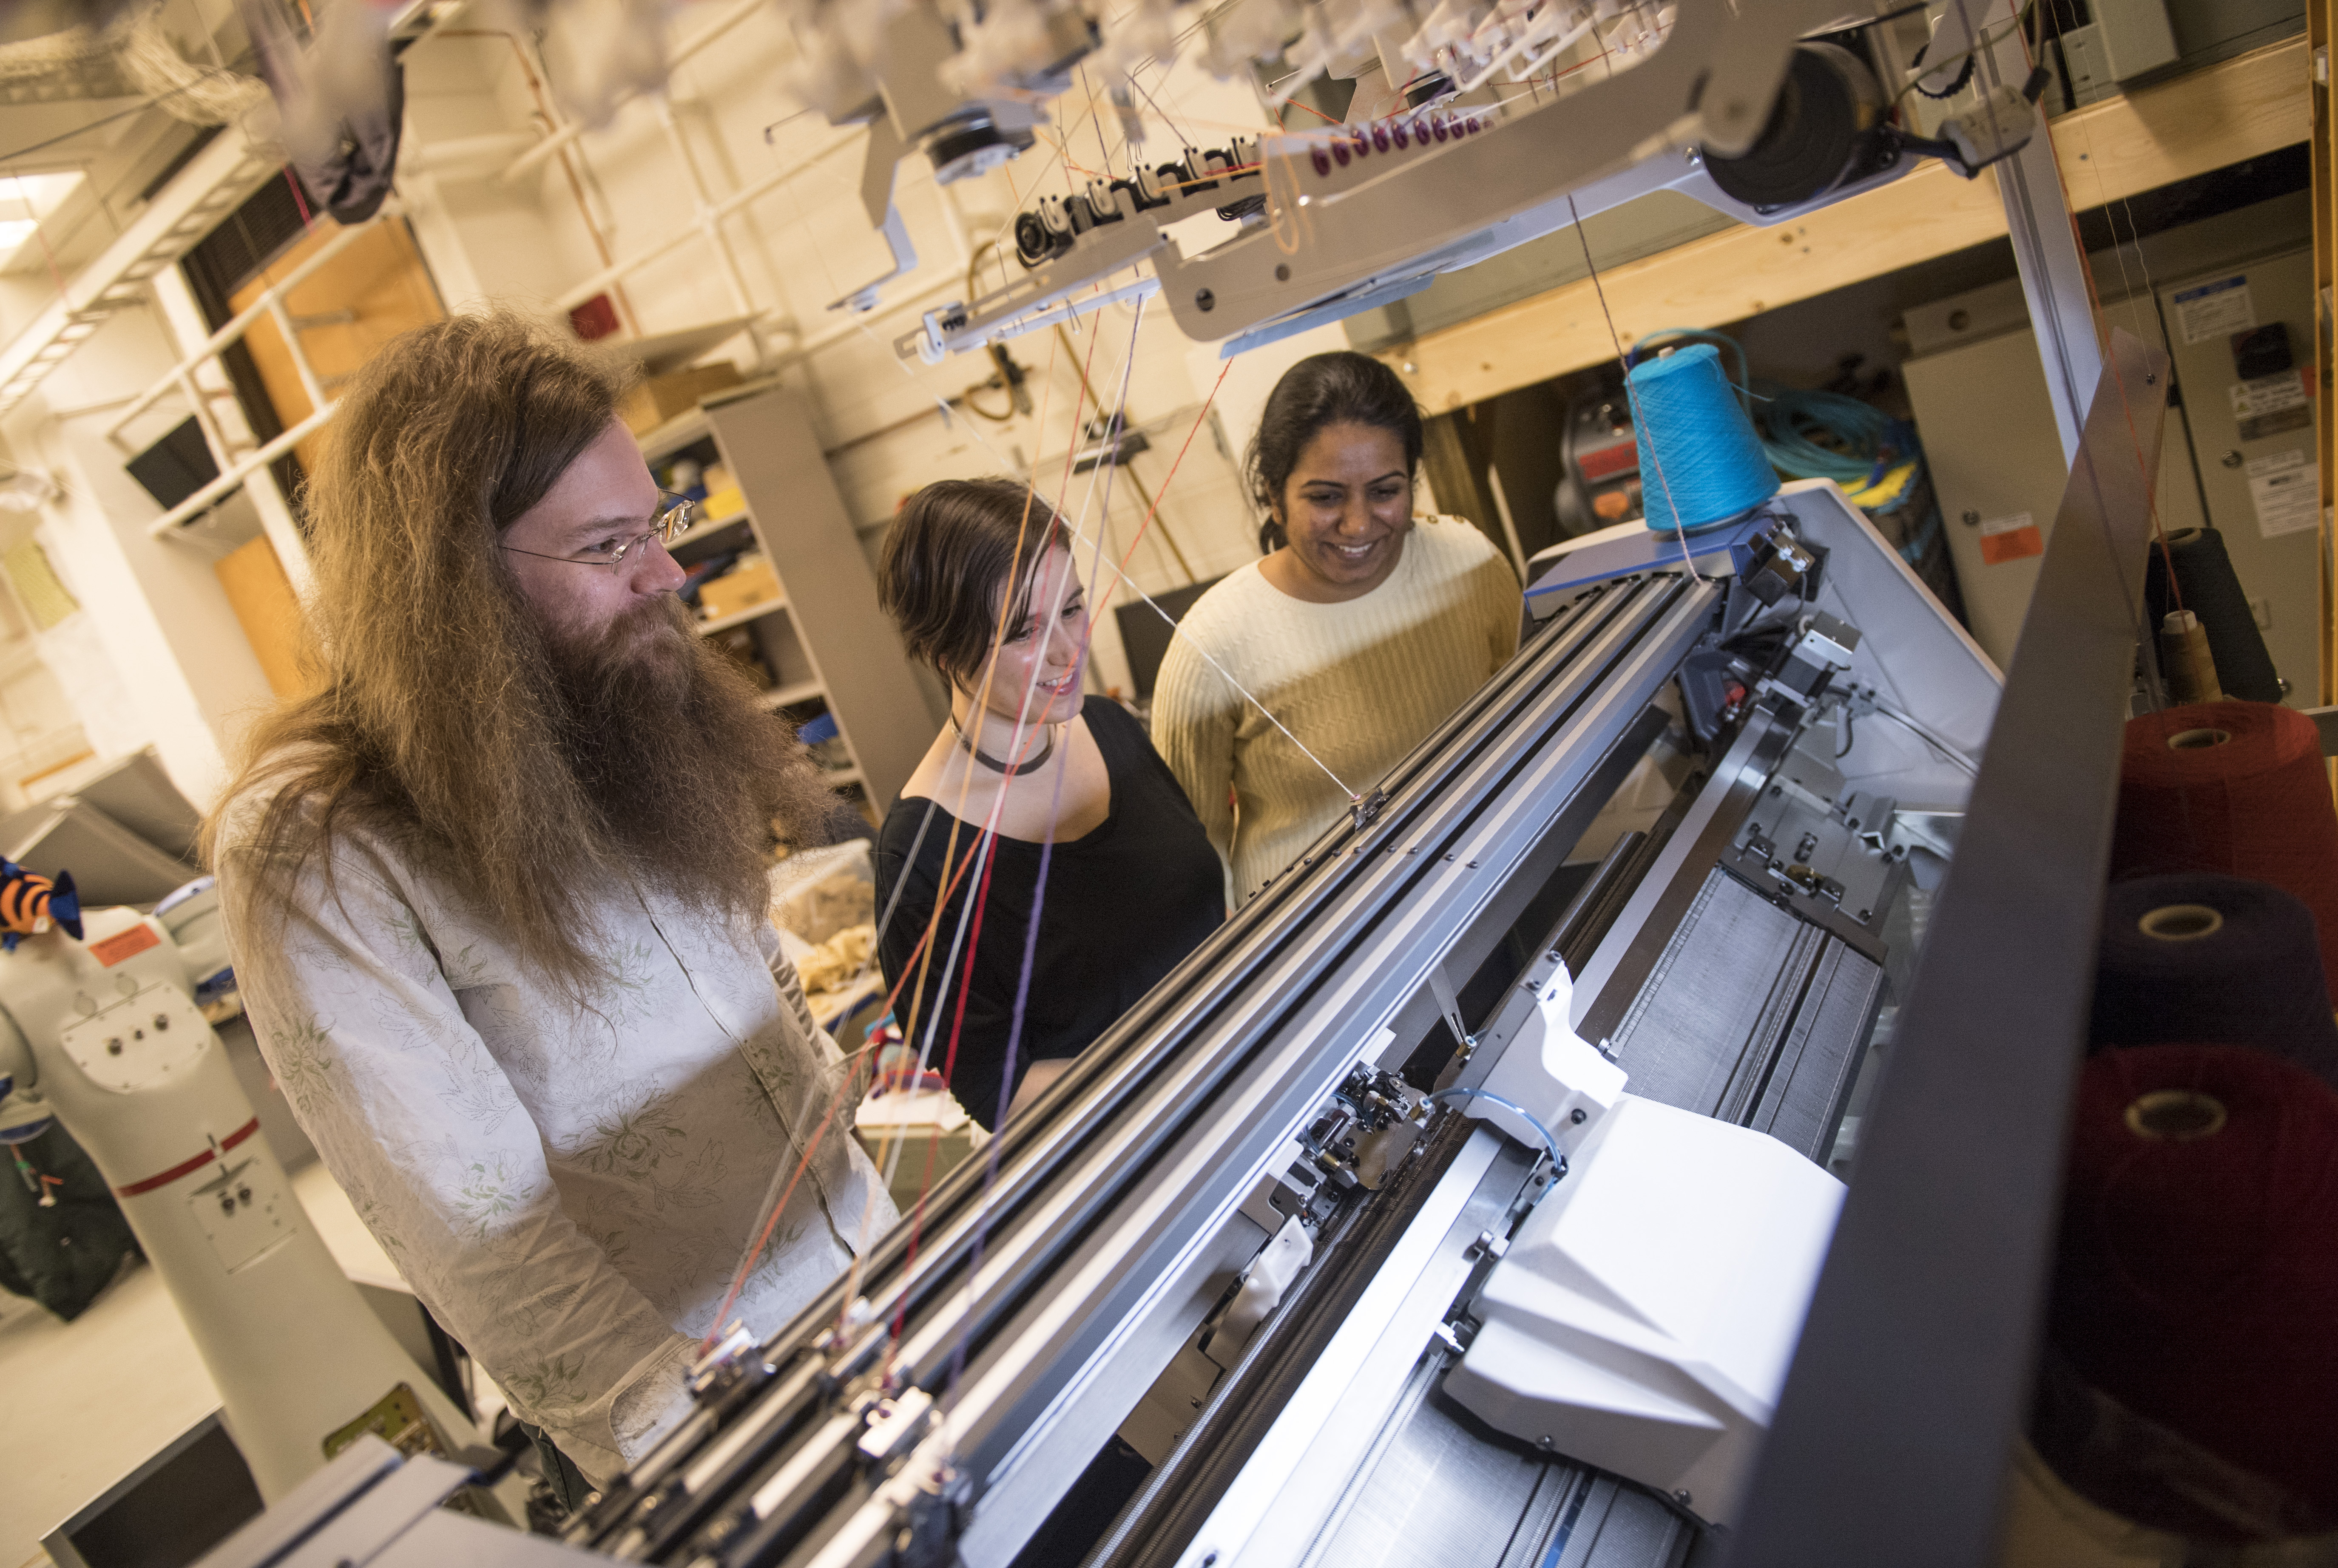 knitting machine being watched by researchers